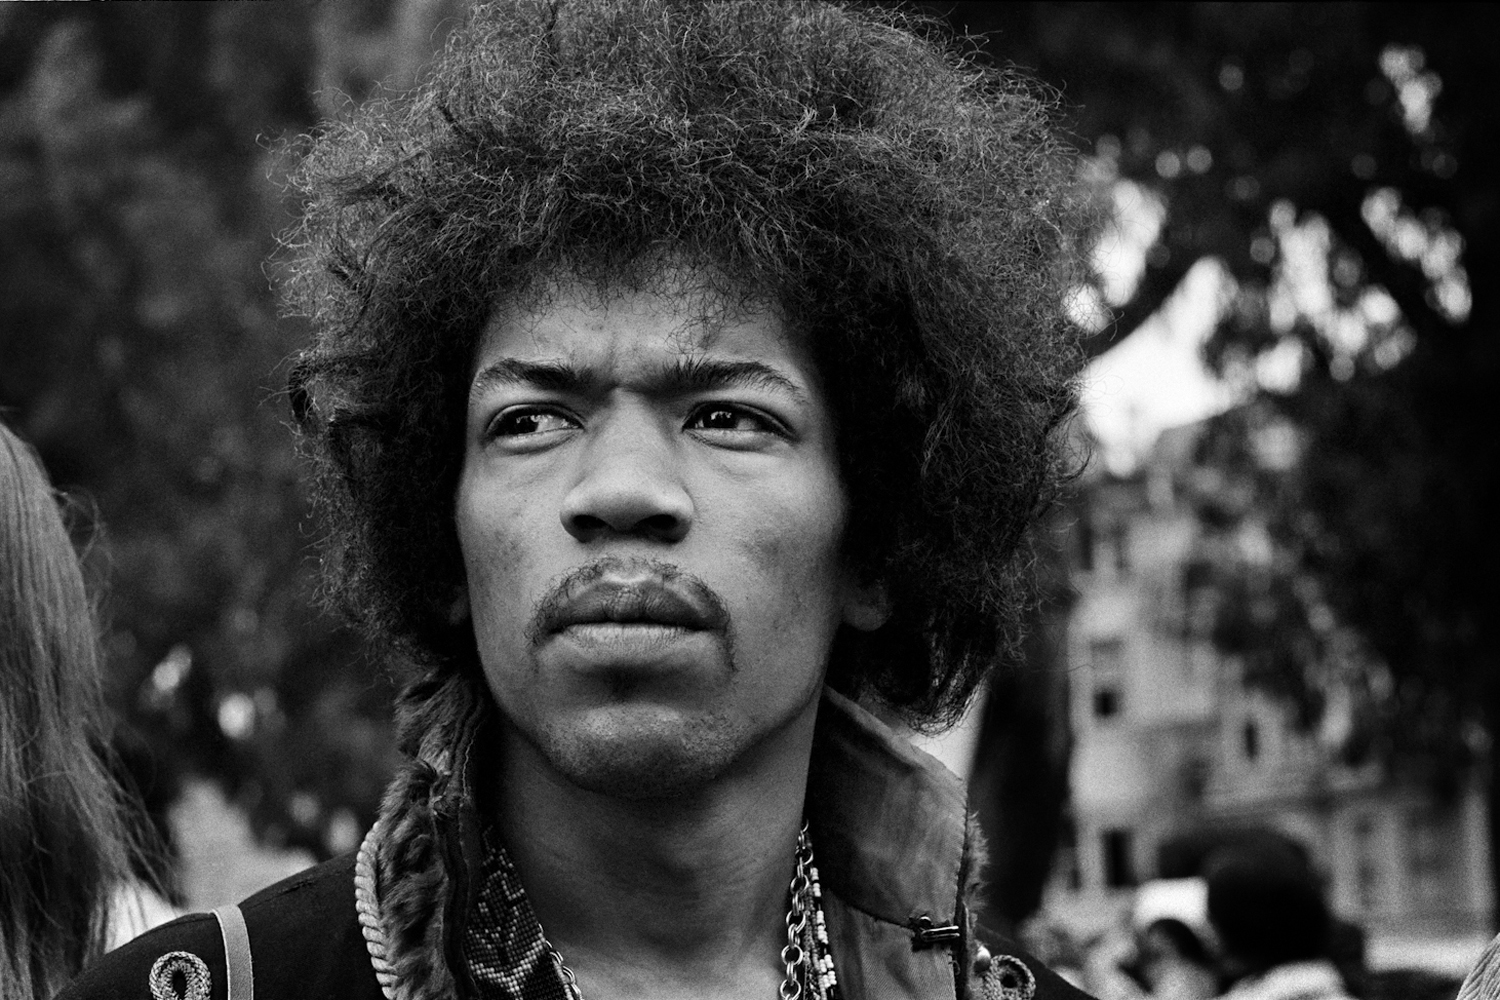 Image: Hendrix at The Panhandle Free Concert in San Francisco, 1967